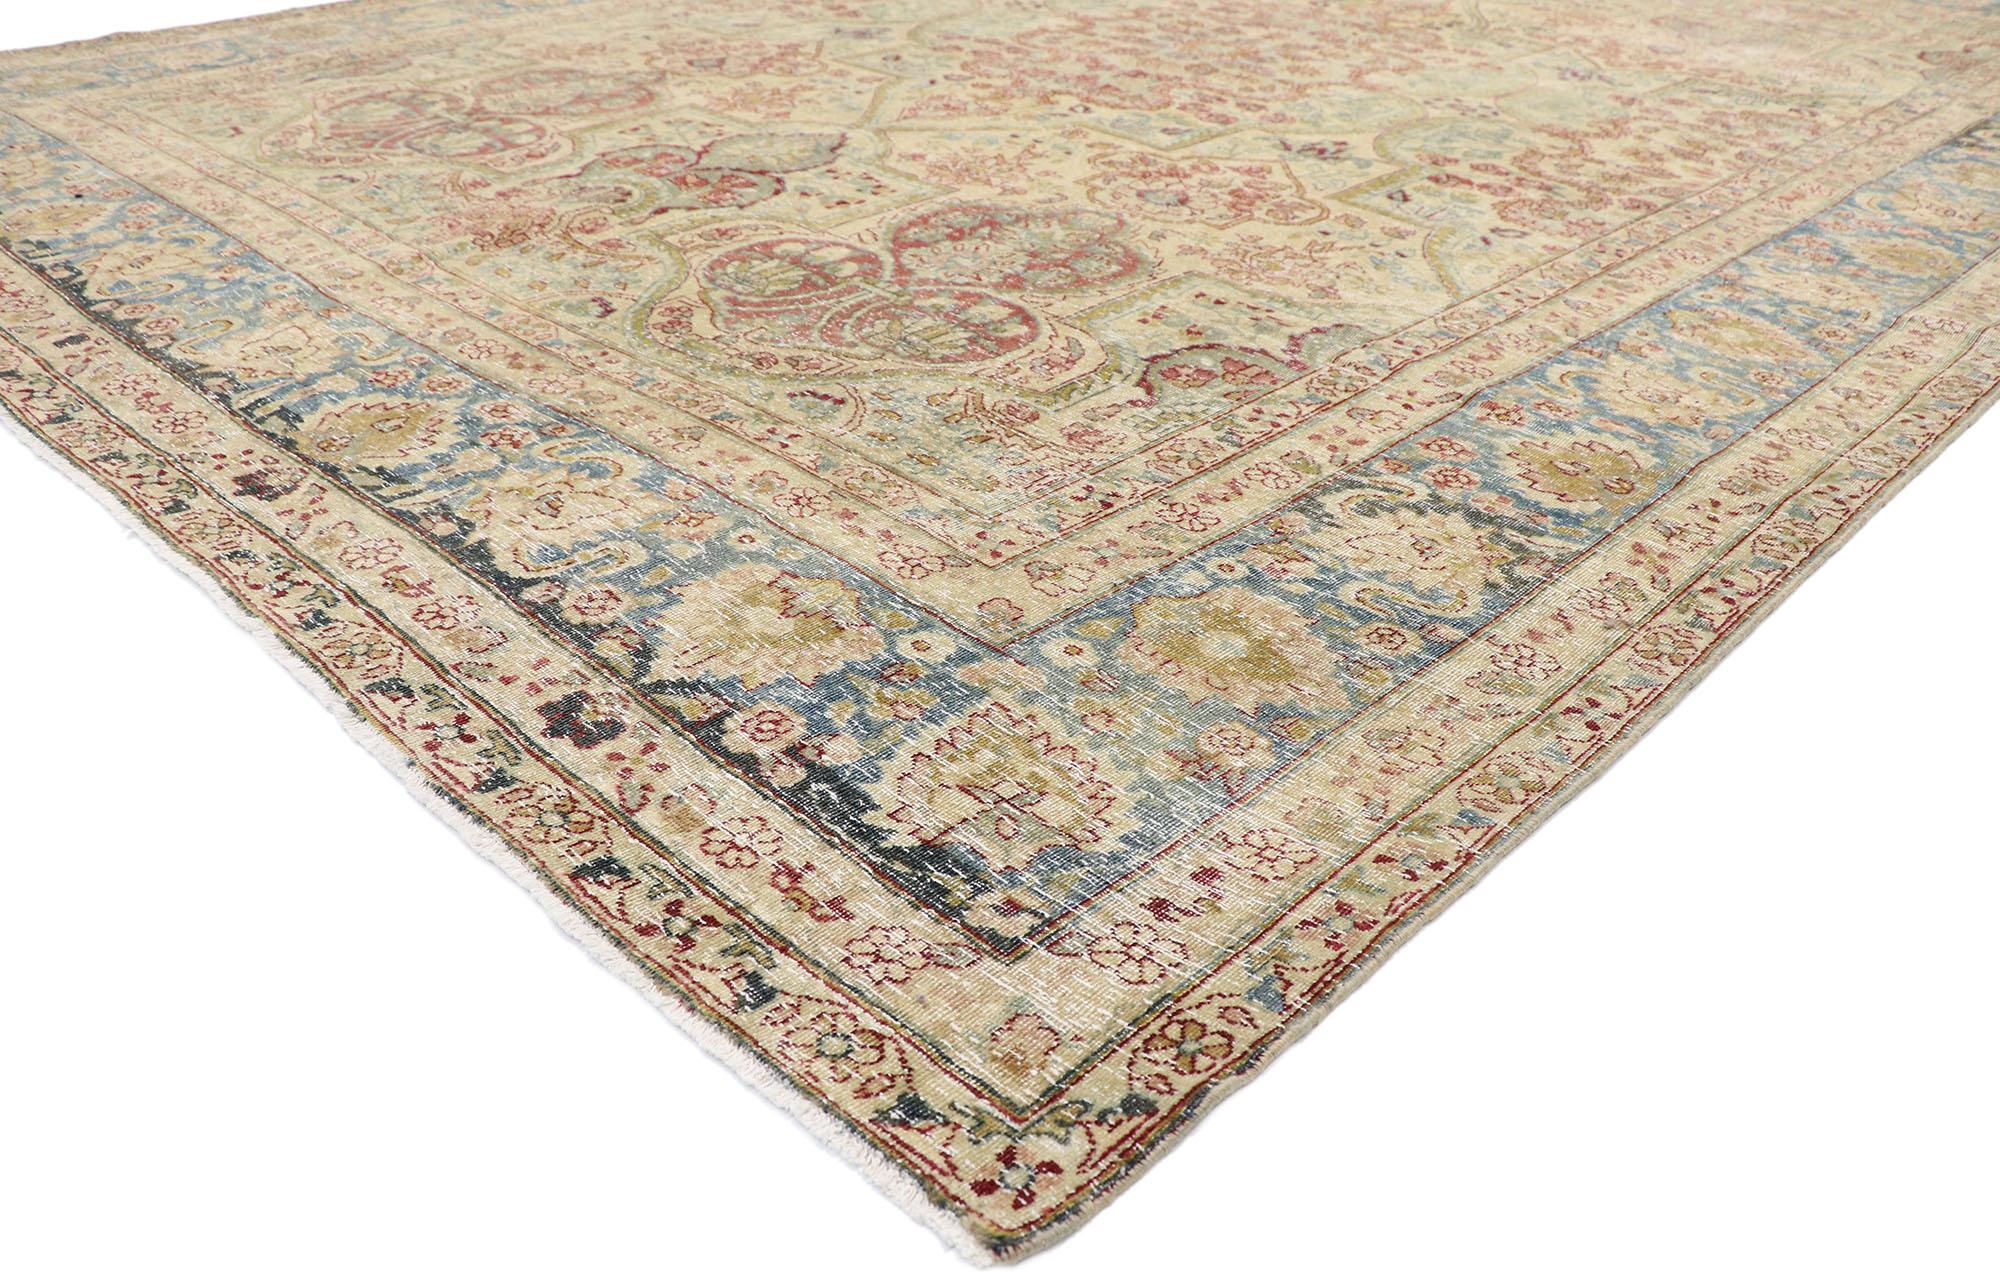 60841 Distressed antique Persian Yazd rug with Rustic English Chintz style. Balancing a timeless floral design with traditional sensibility and a lovingly timeworn patina, this hand-knotted wool distressed antique Persian Yazd rug beautifully